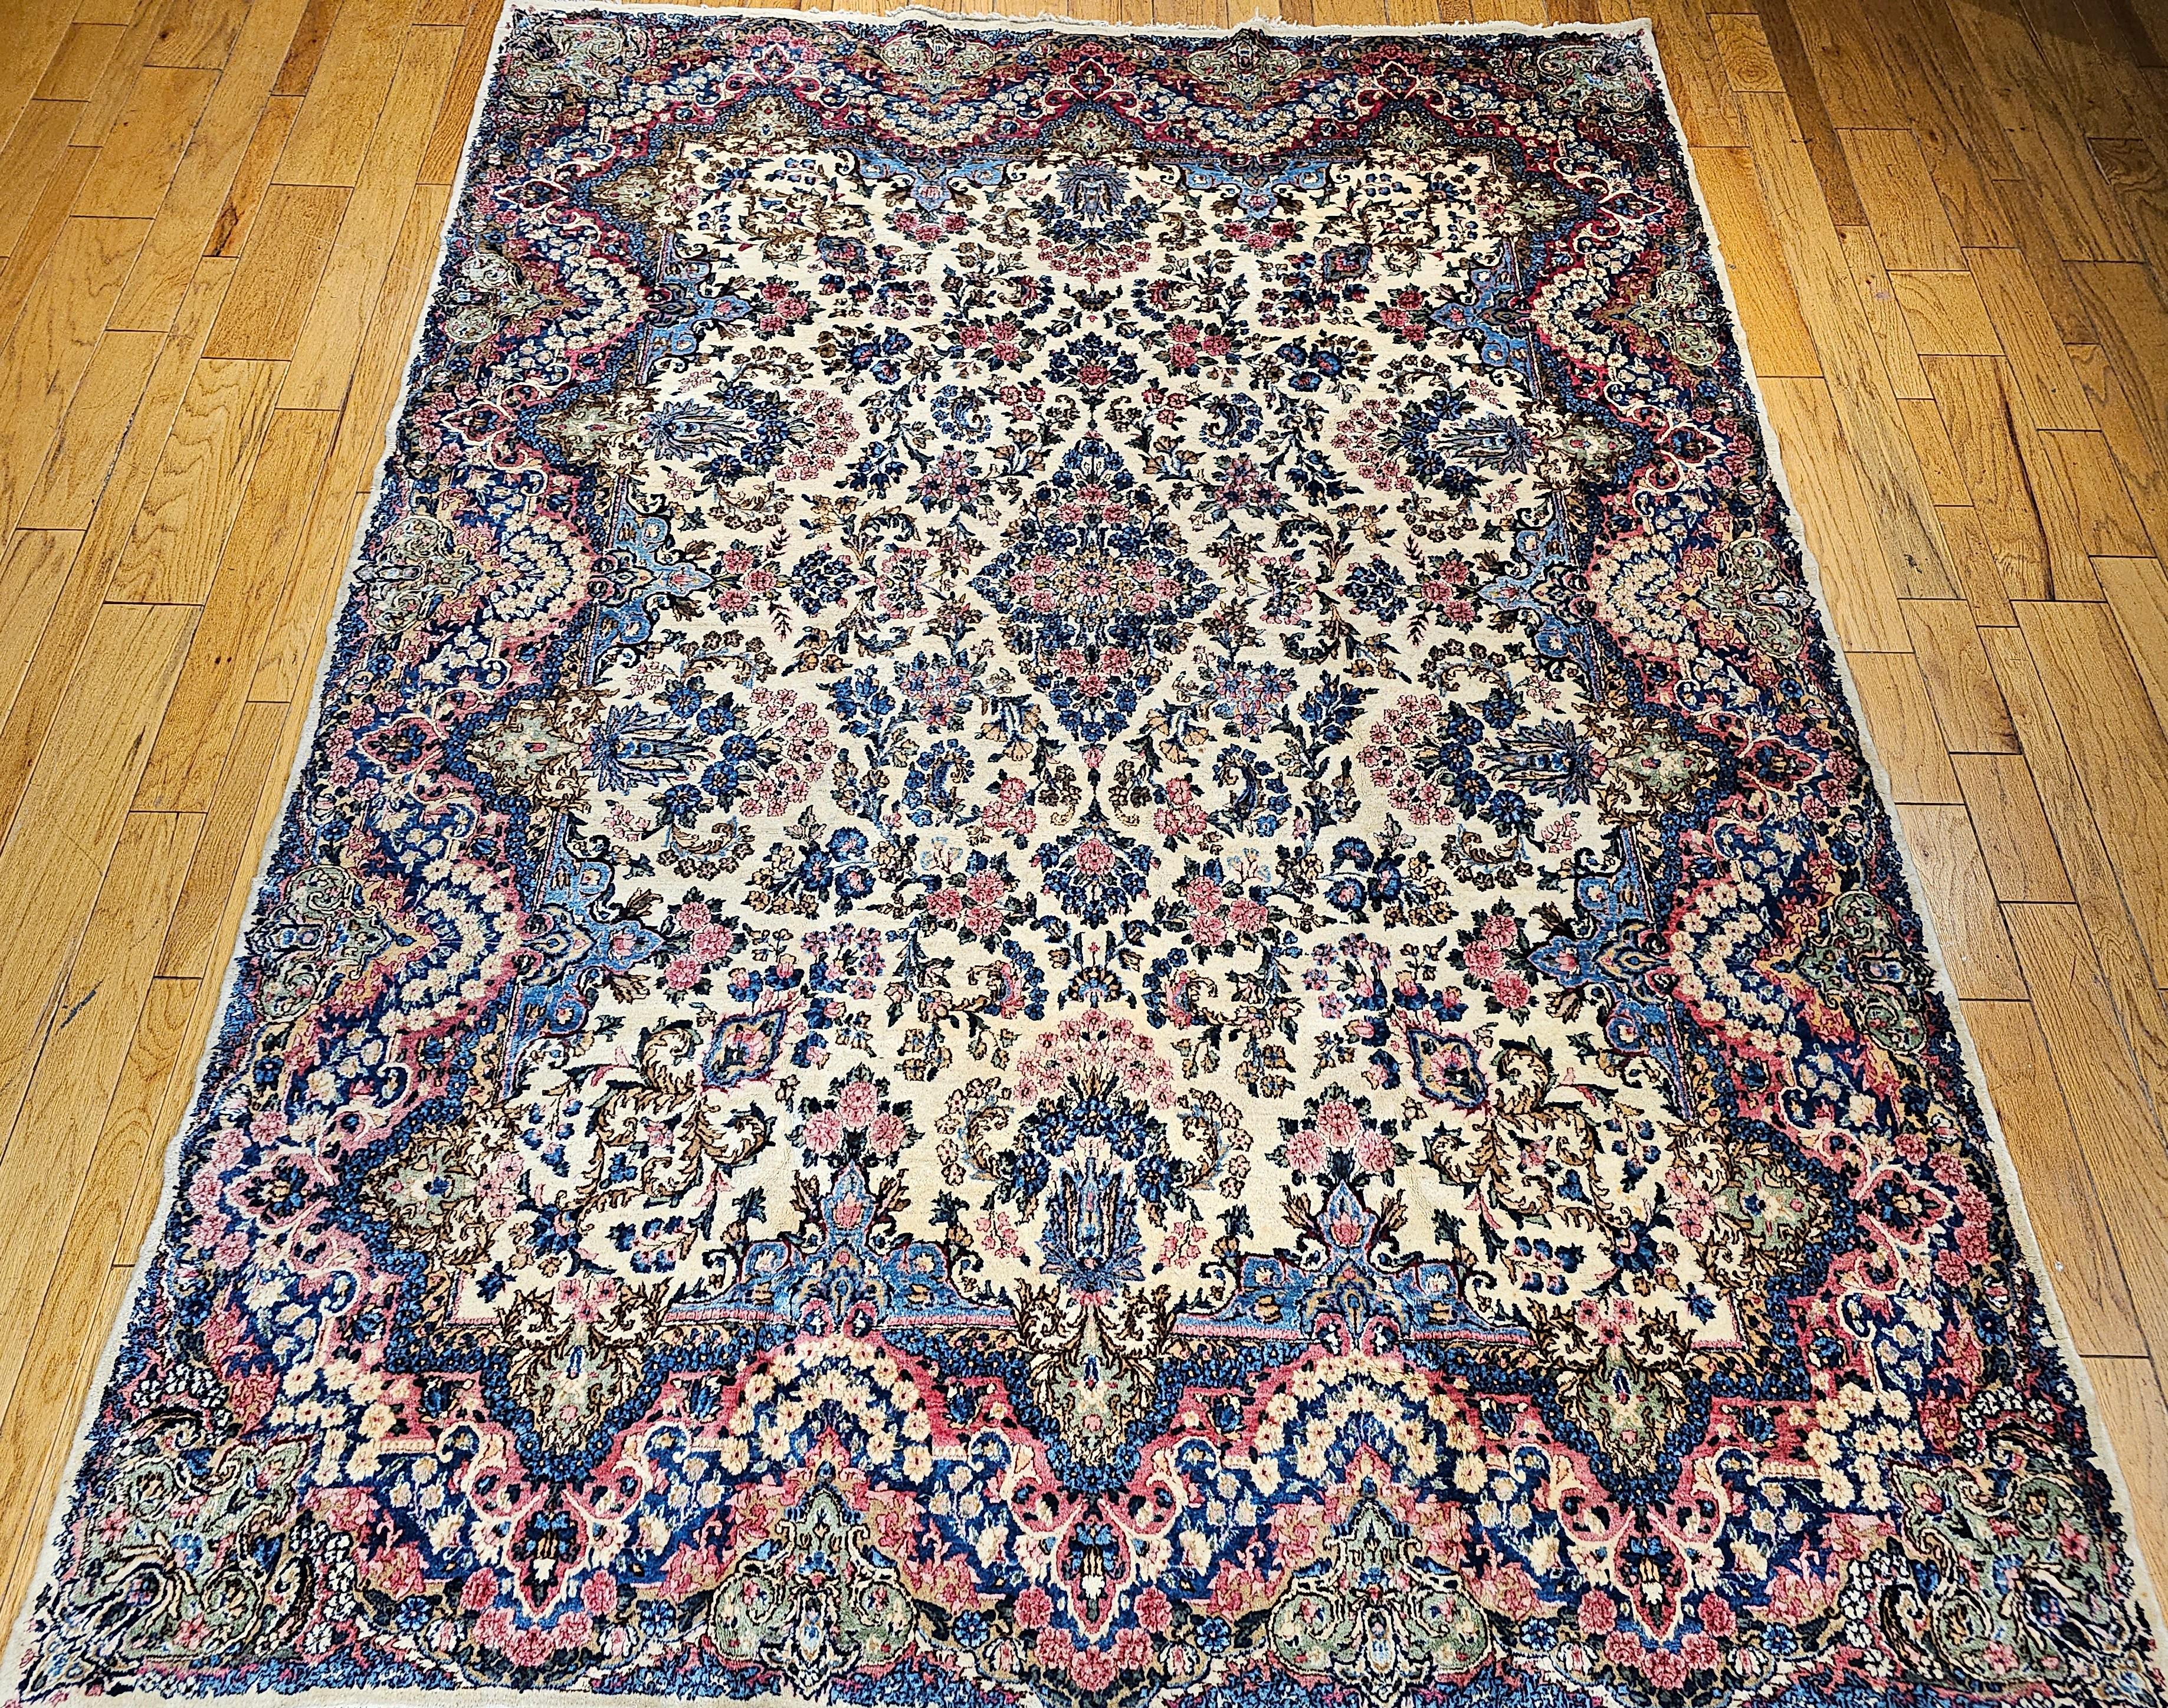 Vintage Persian Kerman Lavar room size  rug in an all-over floral pattern from the early 1900s.  The beautiful Kerman has a floral pattern with flower bouquets in various colors throughout the field in ivory,  red, pink, blue, yellow, and green. 